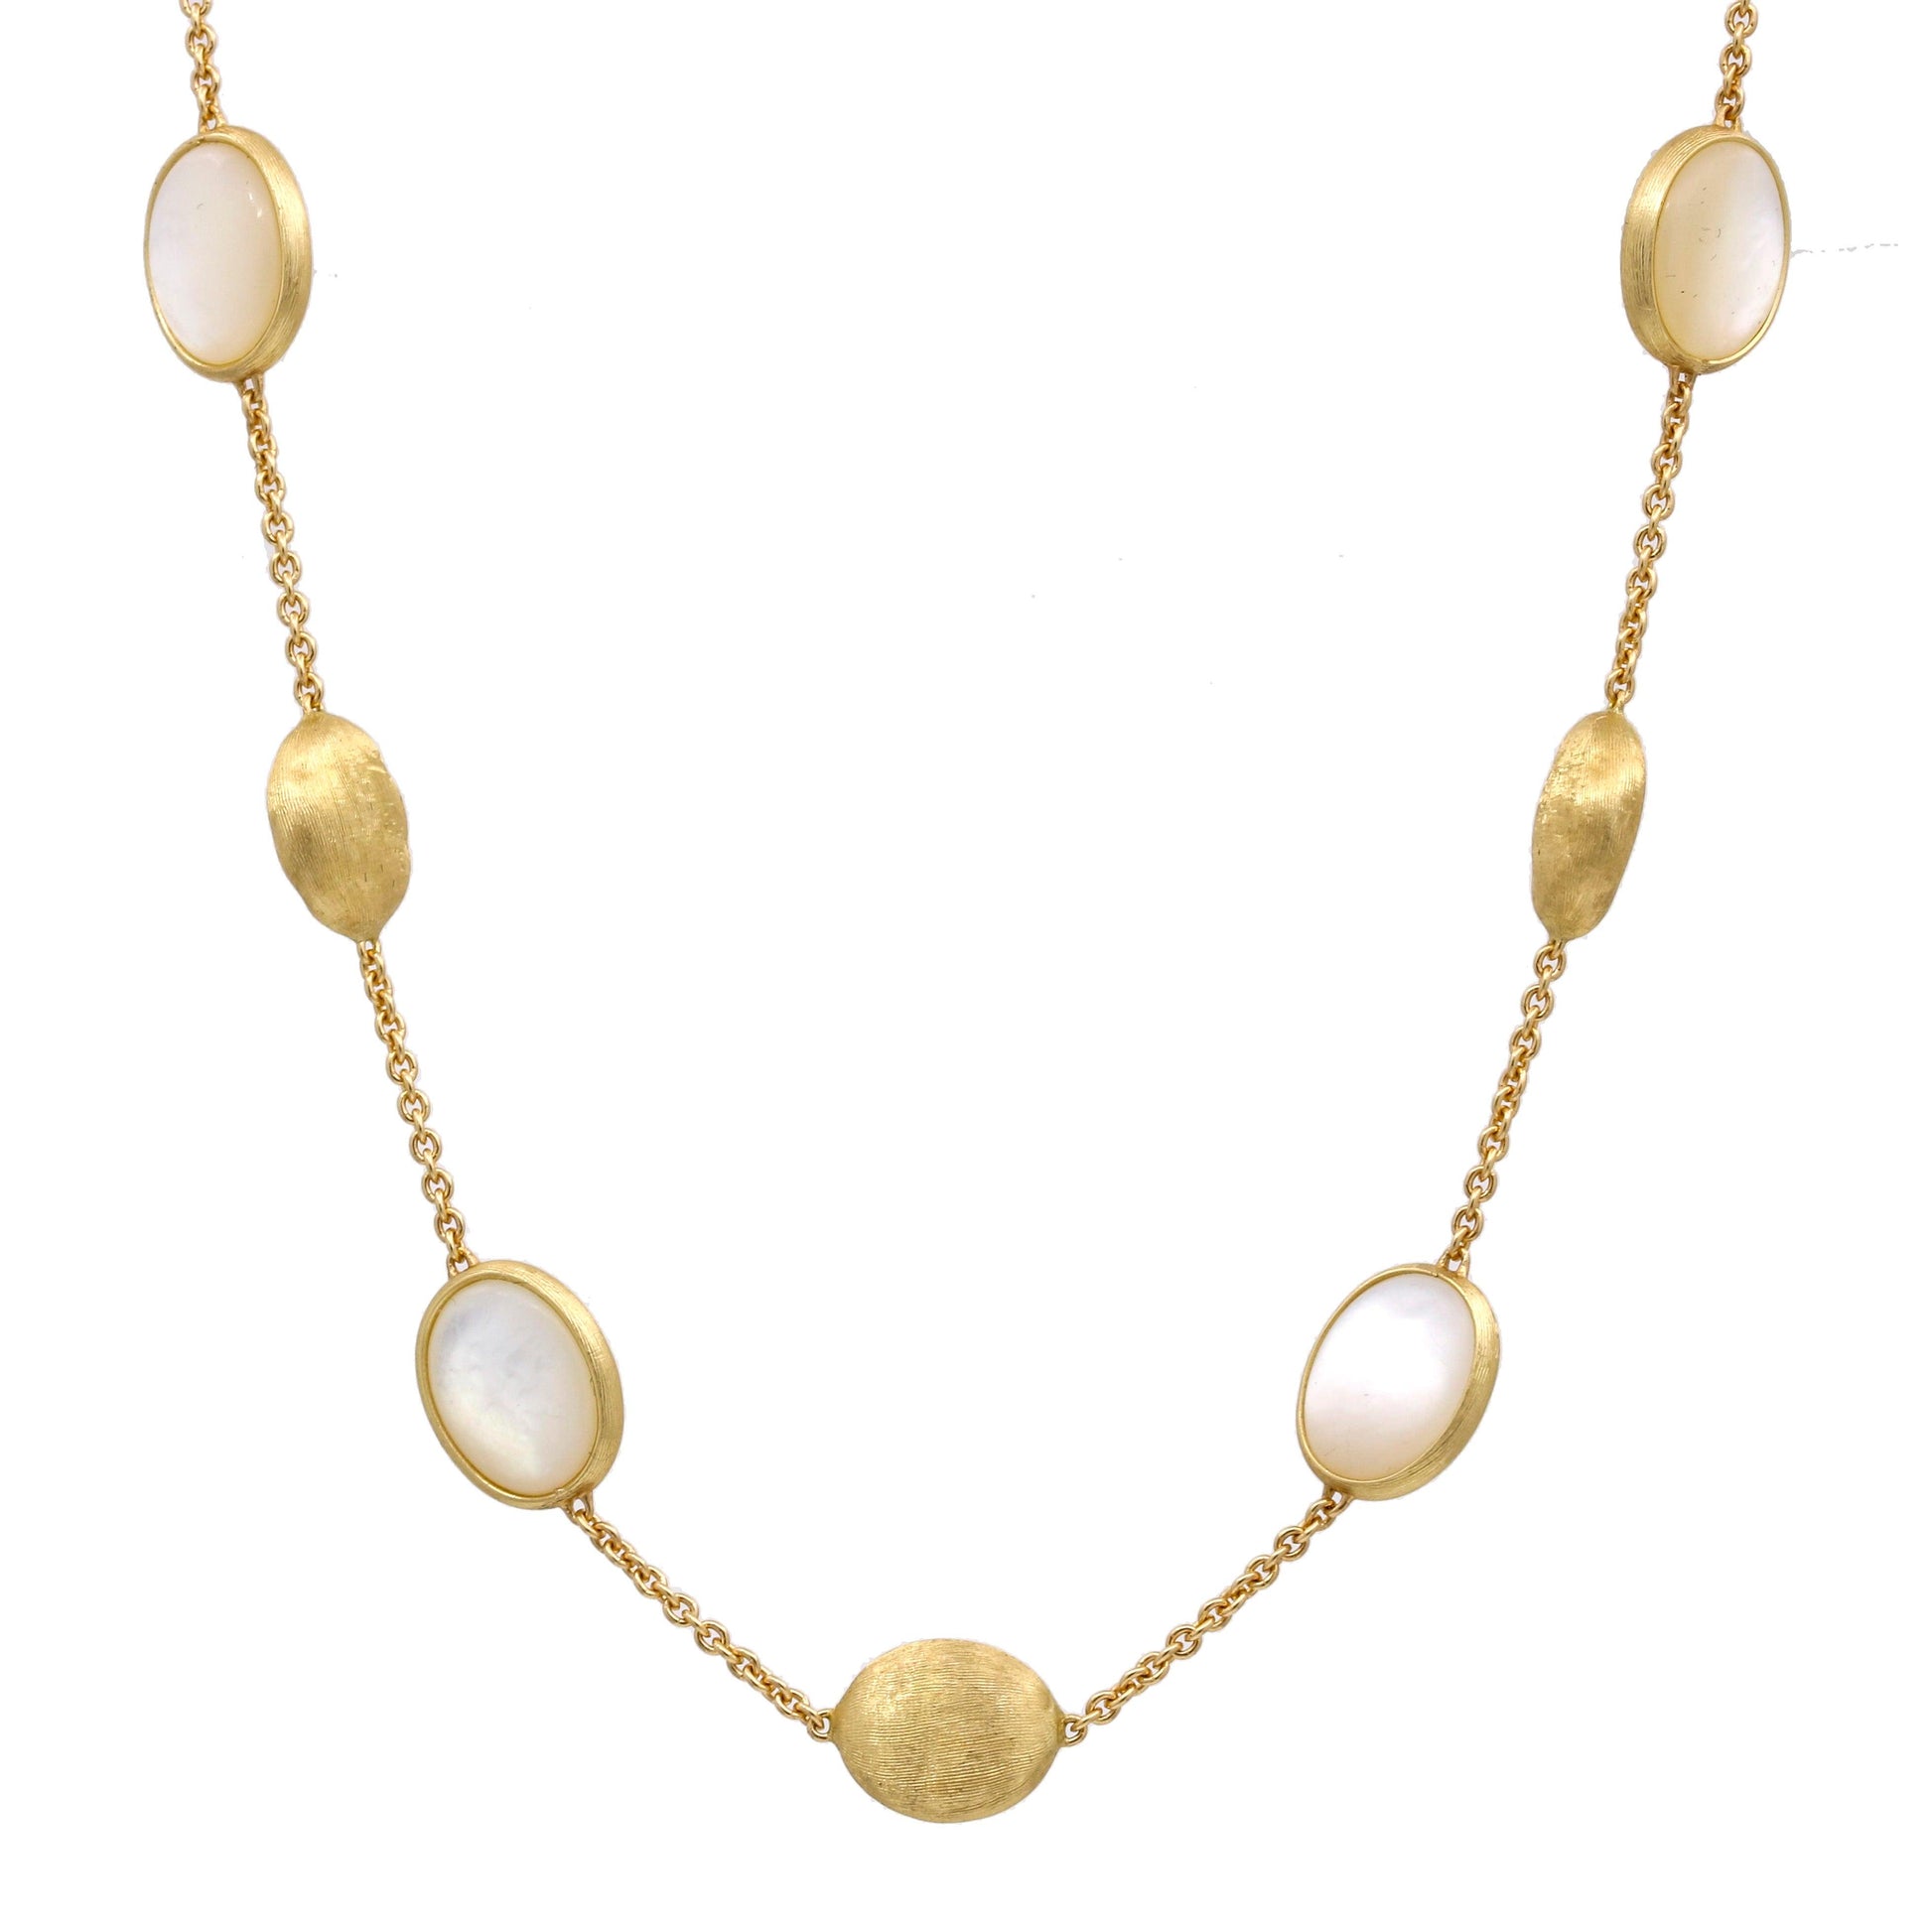 Marco Bicego Siviglia Limited Edition Necklace Mother of Pearl Beads Stations - 31 Jewels Inc.